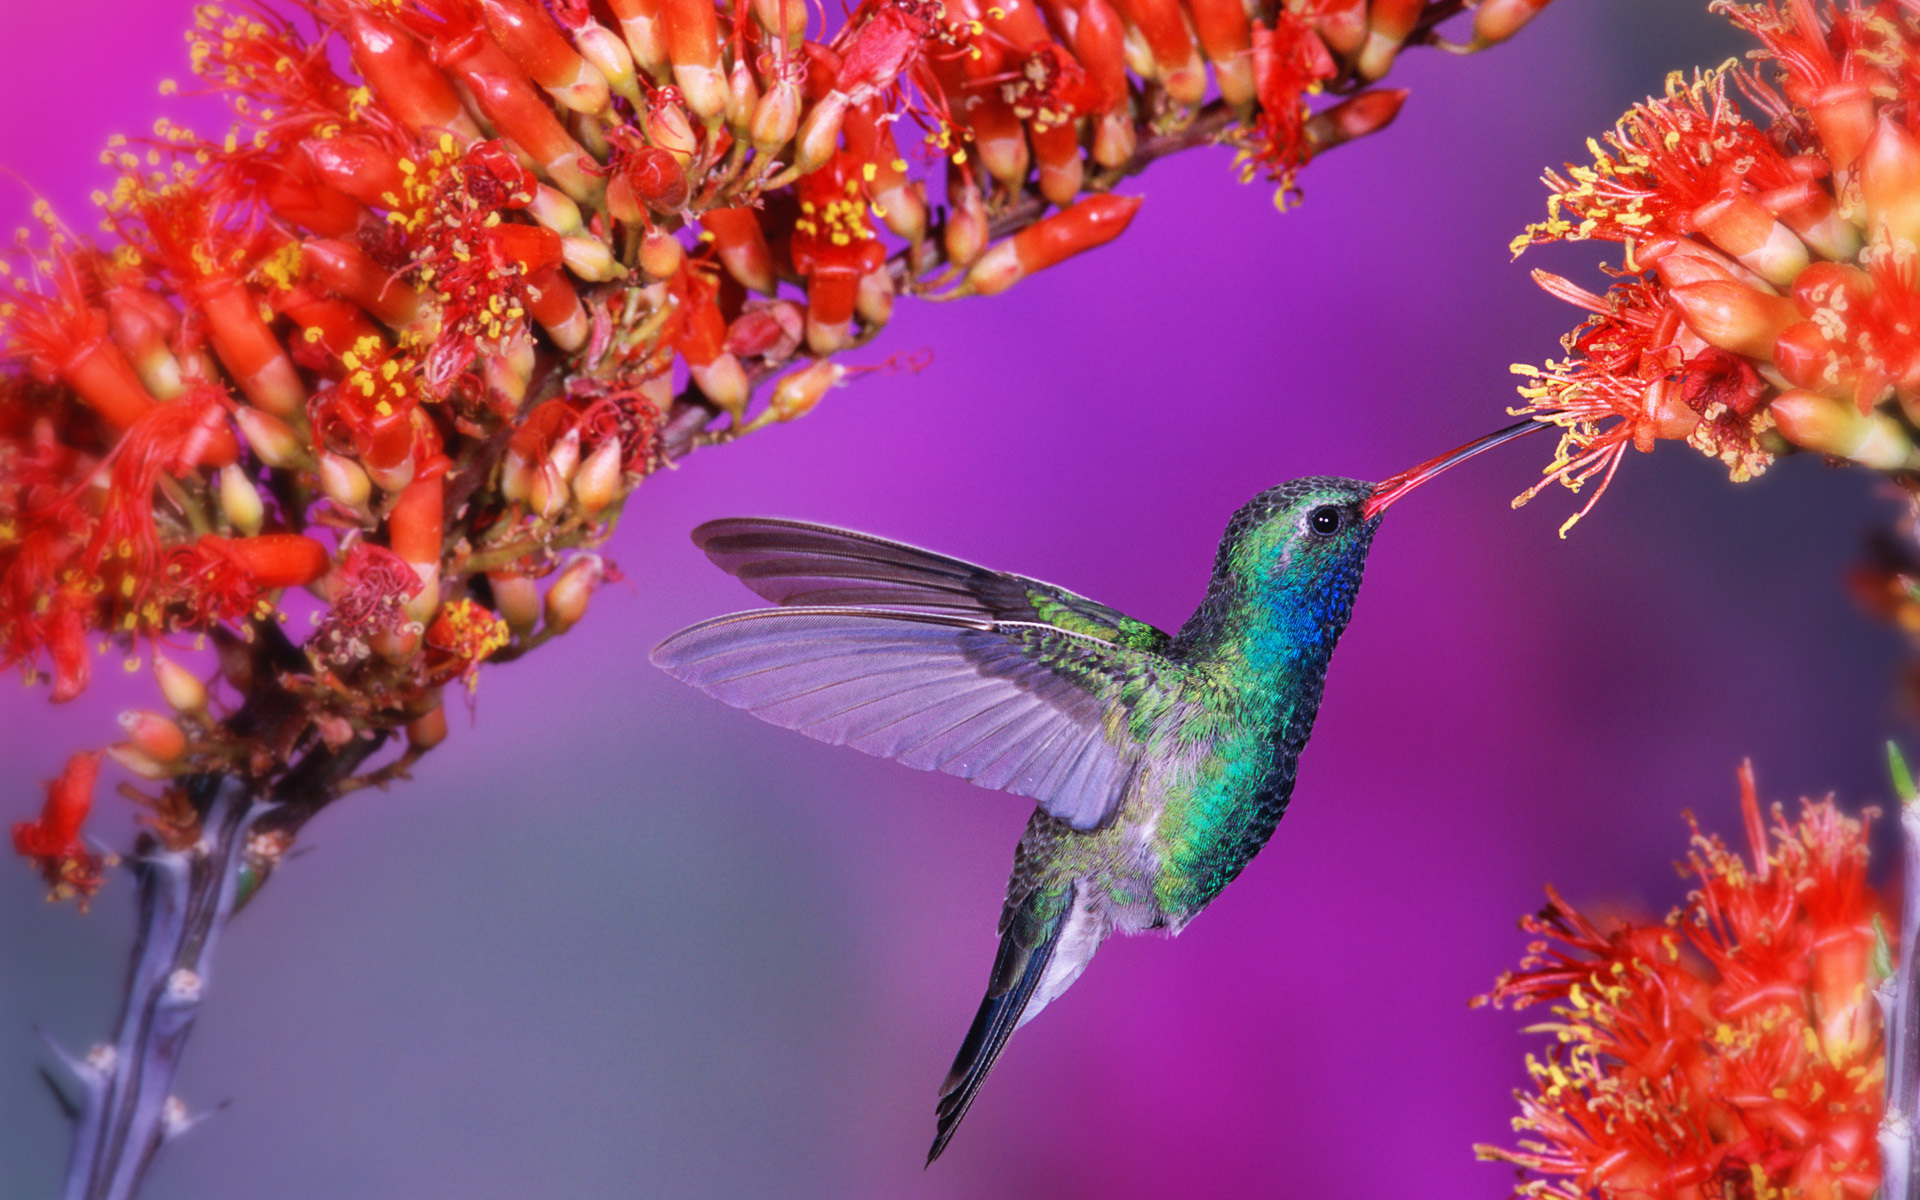 A vibrant, graceful hummingbird perched on a branch.